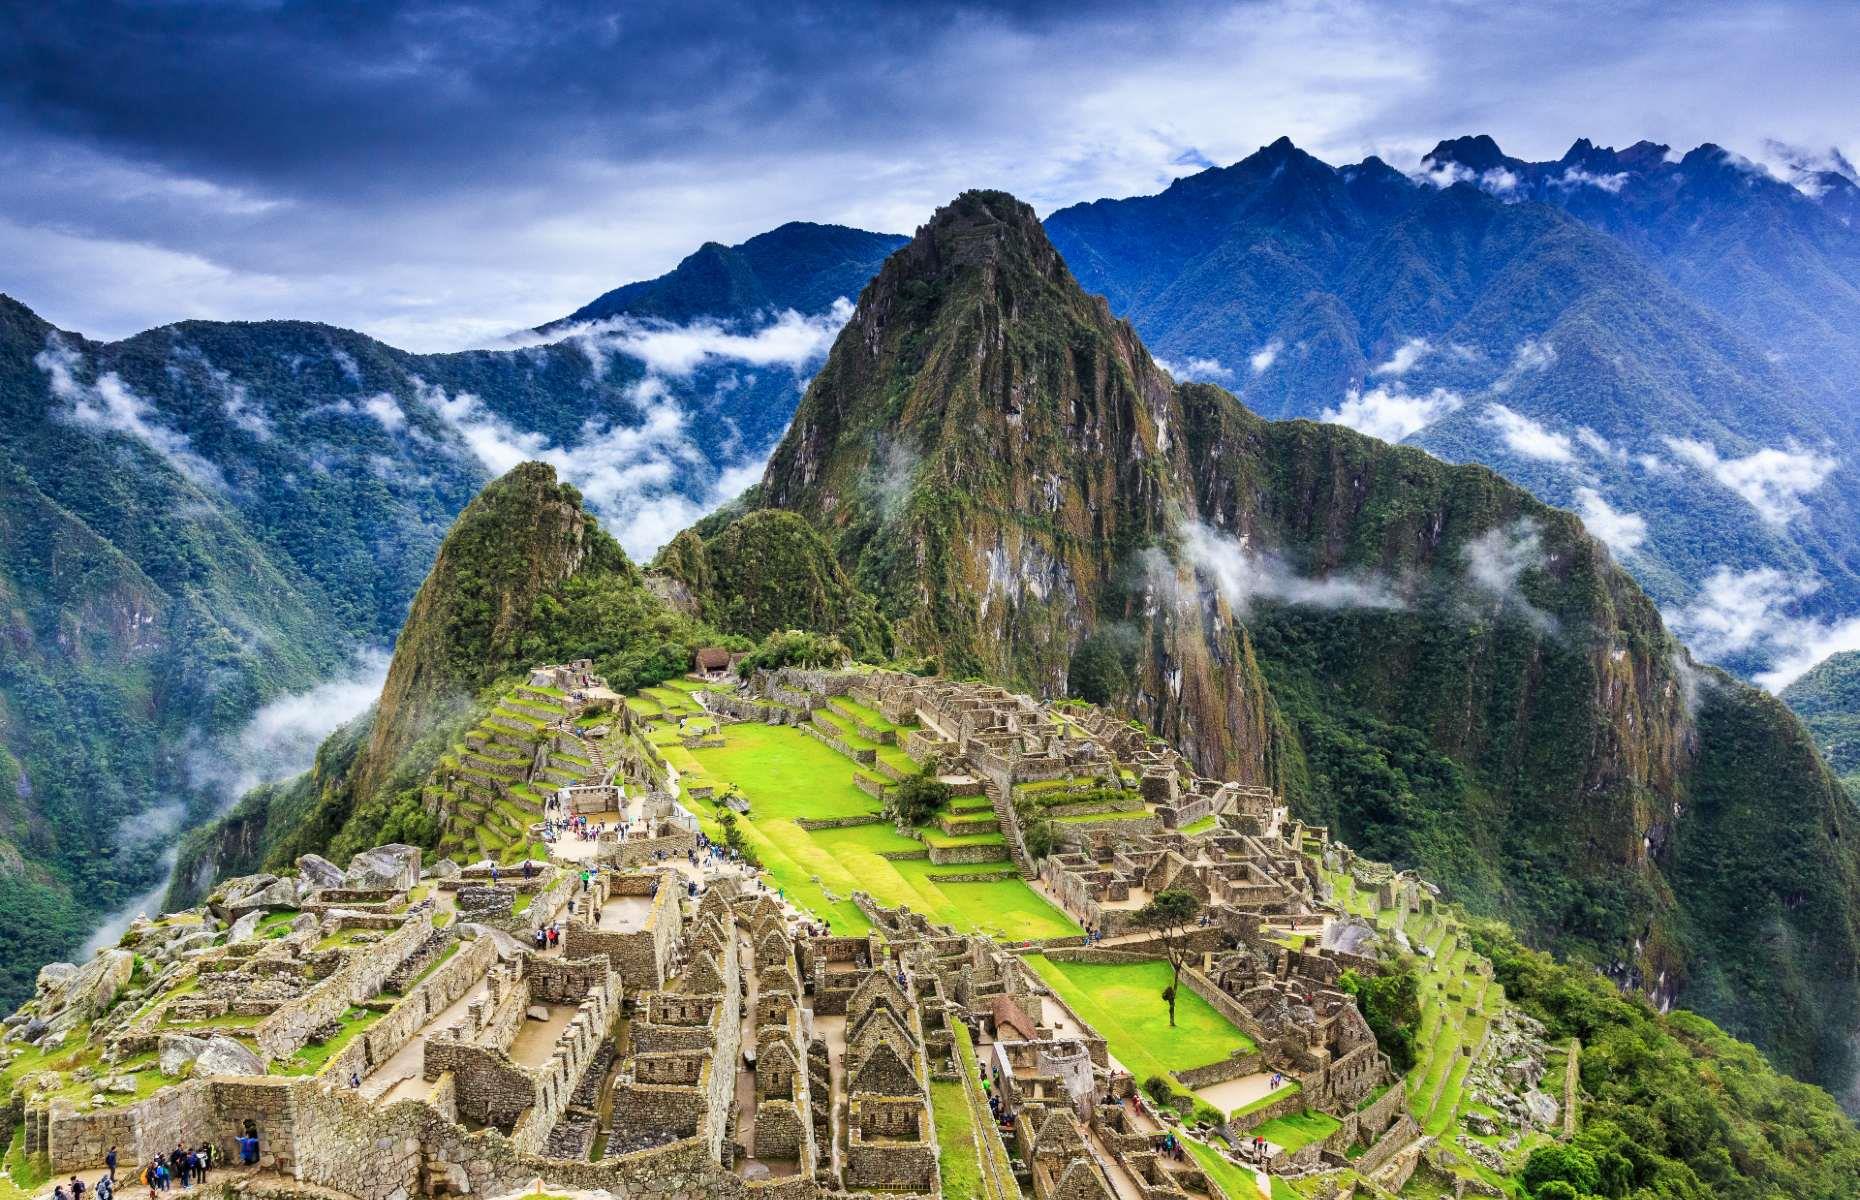 <p>Each year, hordes of people head to the Inca city of Machu Picchu. In 2021 it hosted around 448,000 visitors, while before the pandemic in 2019 a massive 1.5 million tourists descended on the sacred site. To preserve the ancient wonder, <a href="https://www.incatrailmachu.com/en/travel-blog/machu-picchu-new-rules-2019">tourist numbers have been capped at 4,044 a day</a>, and those wishing to visit must purchase an entry ticket online ahead of schedule. It’s also necessary for all travelers to attend with a tour guide, with group sizes limited to 10 people per guide.</p>